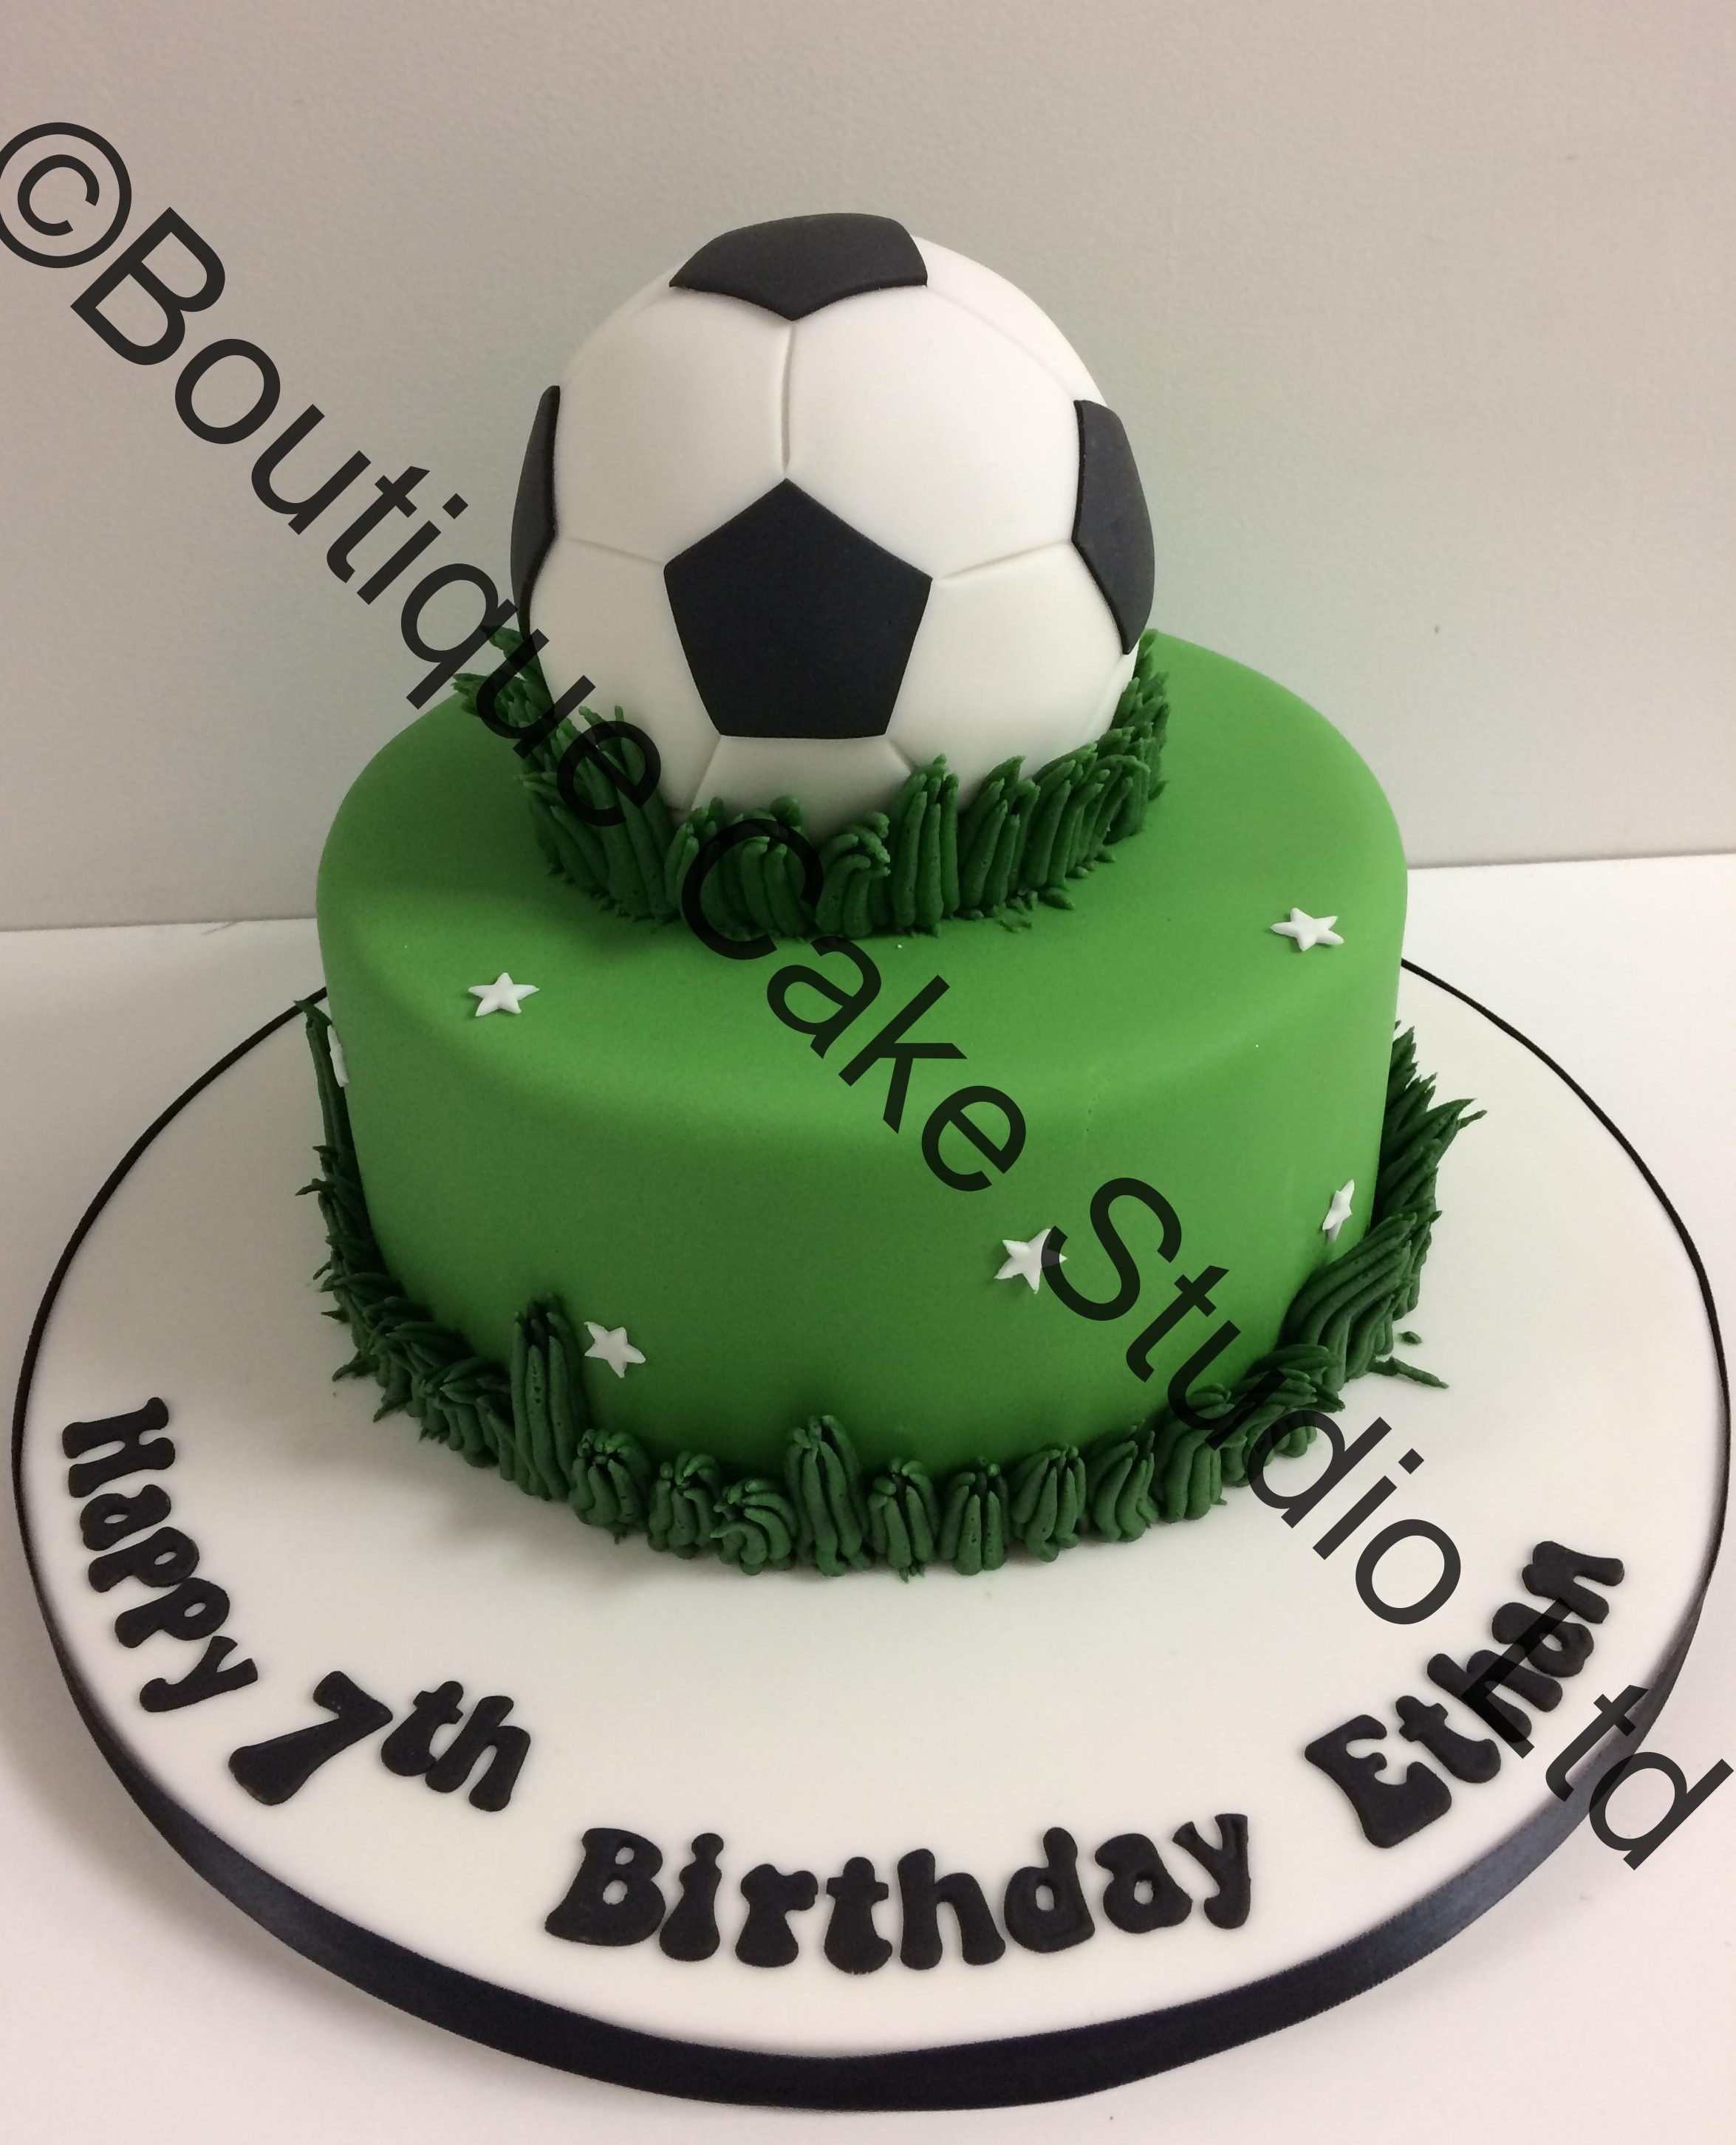 Small Football on a green base cake